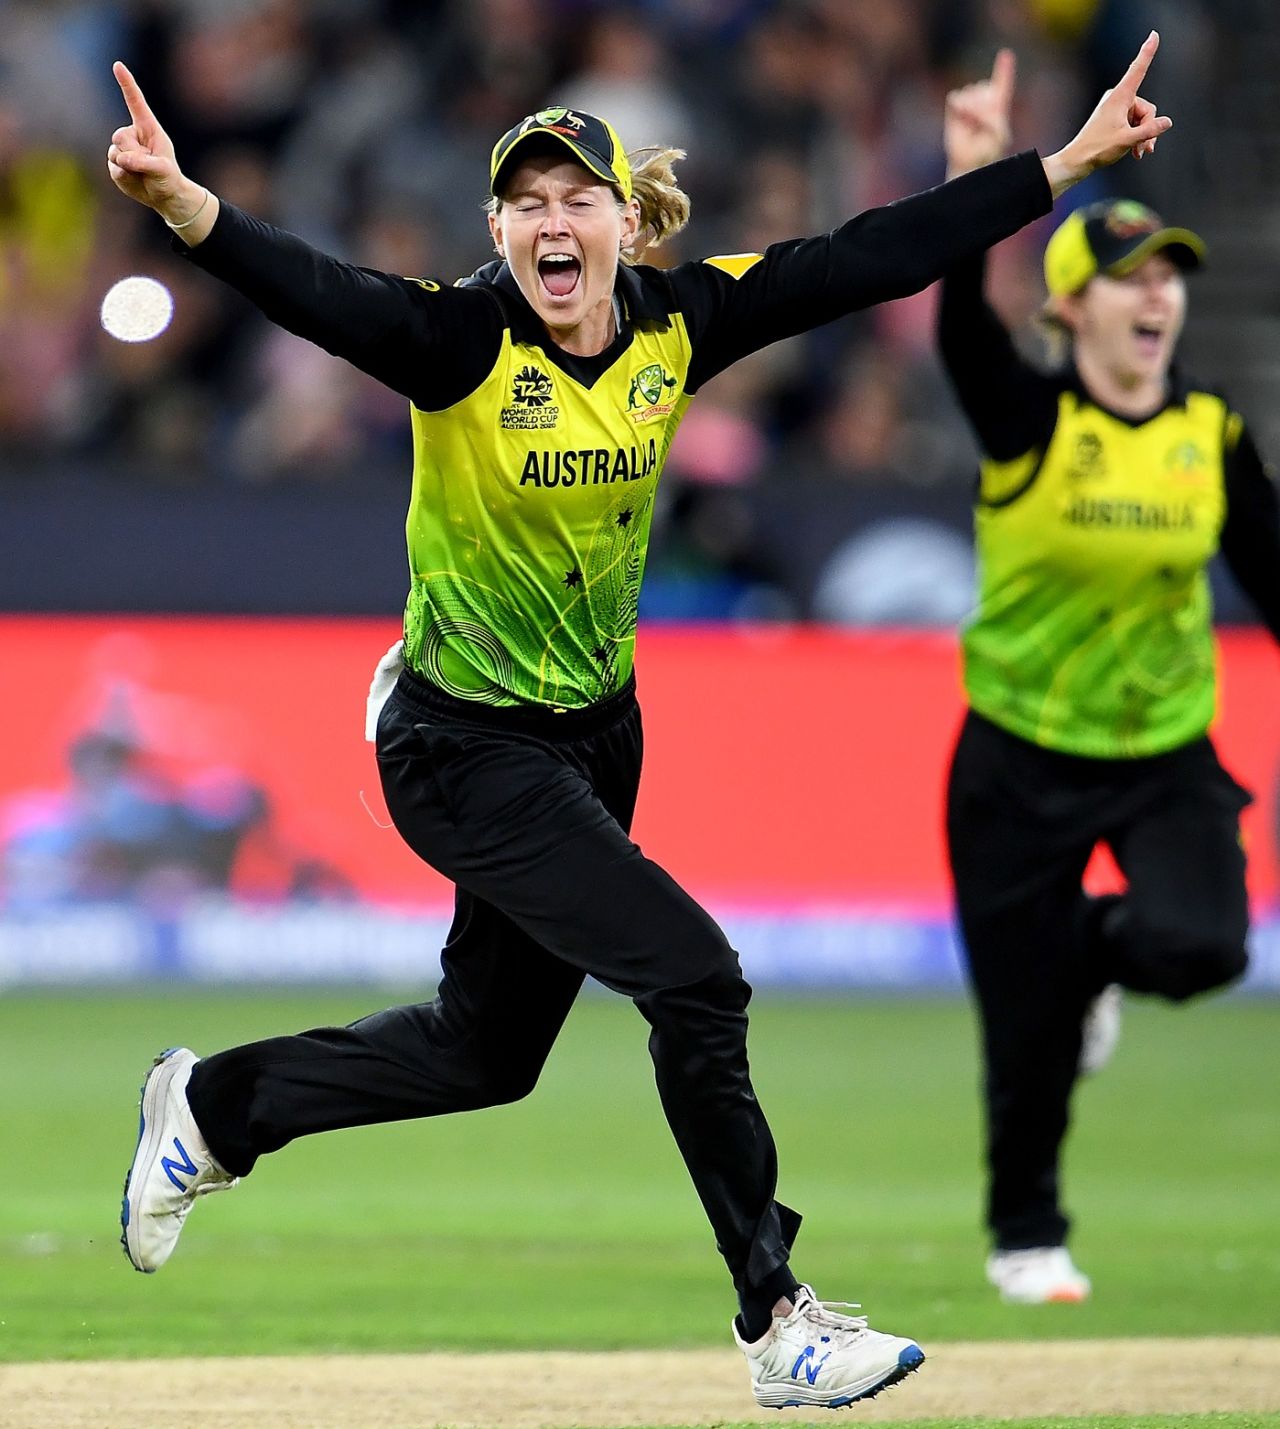 That winning feeling - Meg Lanning is over the moon, Australia v India, final, Women's T20 World Cup, Melbourne, March 8, 2020